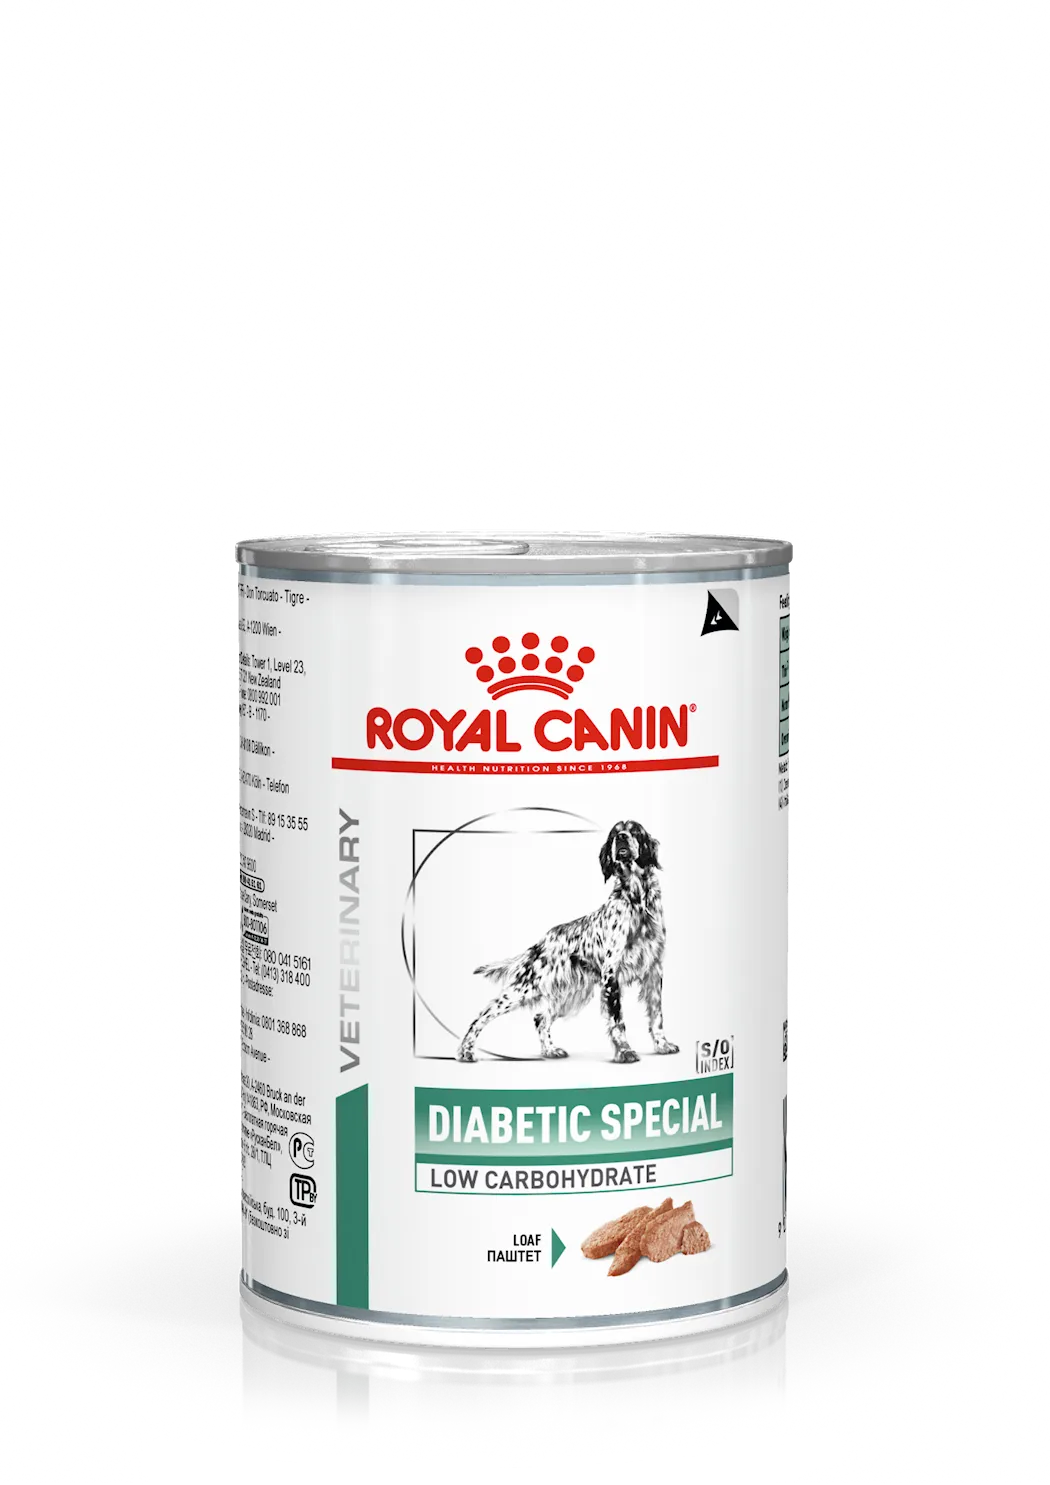 Royal Canin Veterinary Diets Dog Veterinary Diets Weight Management Diabetic Special Low Carbohydr. Loaf Can våtfôr til hund